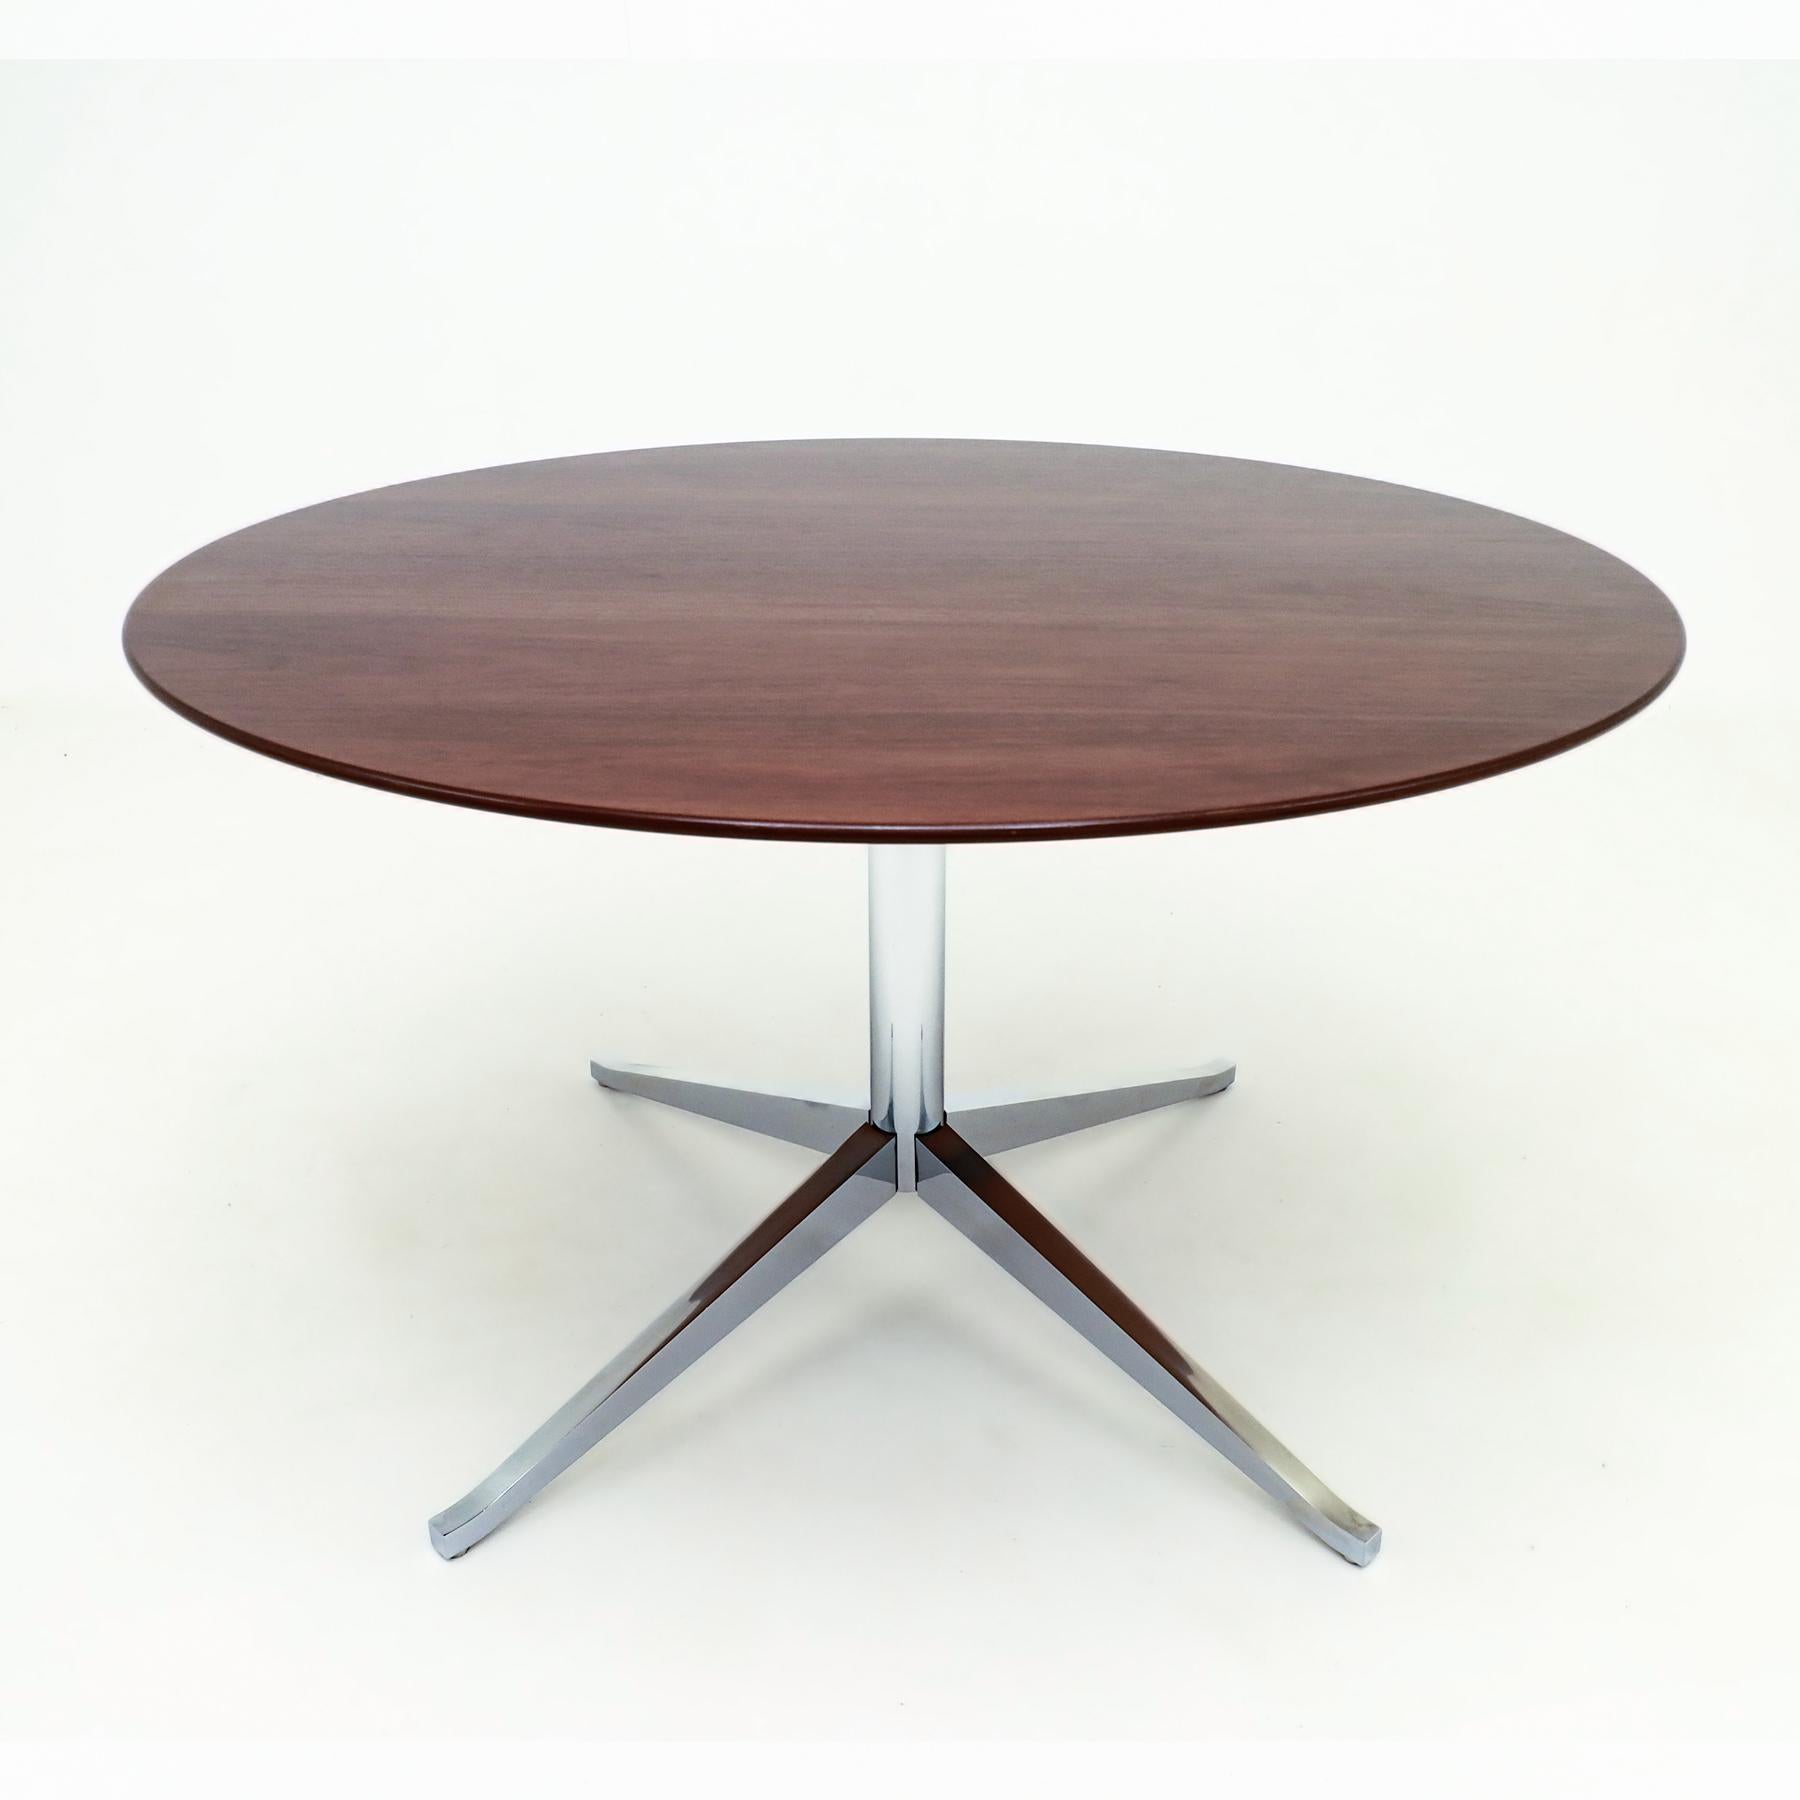 Vintage circular Walnut and chrome Florence Knoll pedestal dining or conference table.

This table is a classic Florence Knoll Walnut table with a heavy four star chrome pedestal base and maintains the original adjustable floor glides. The design